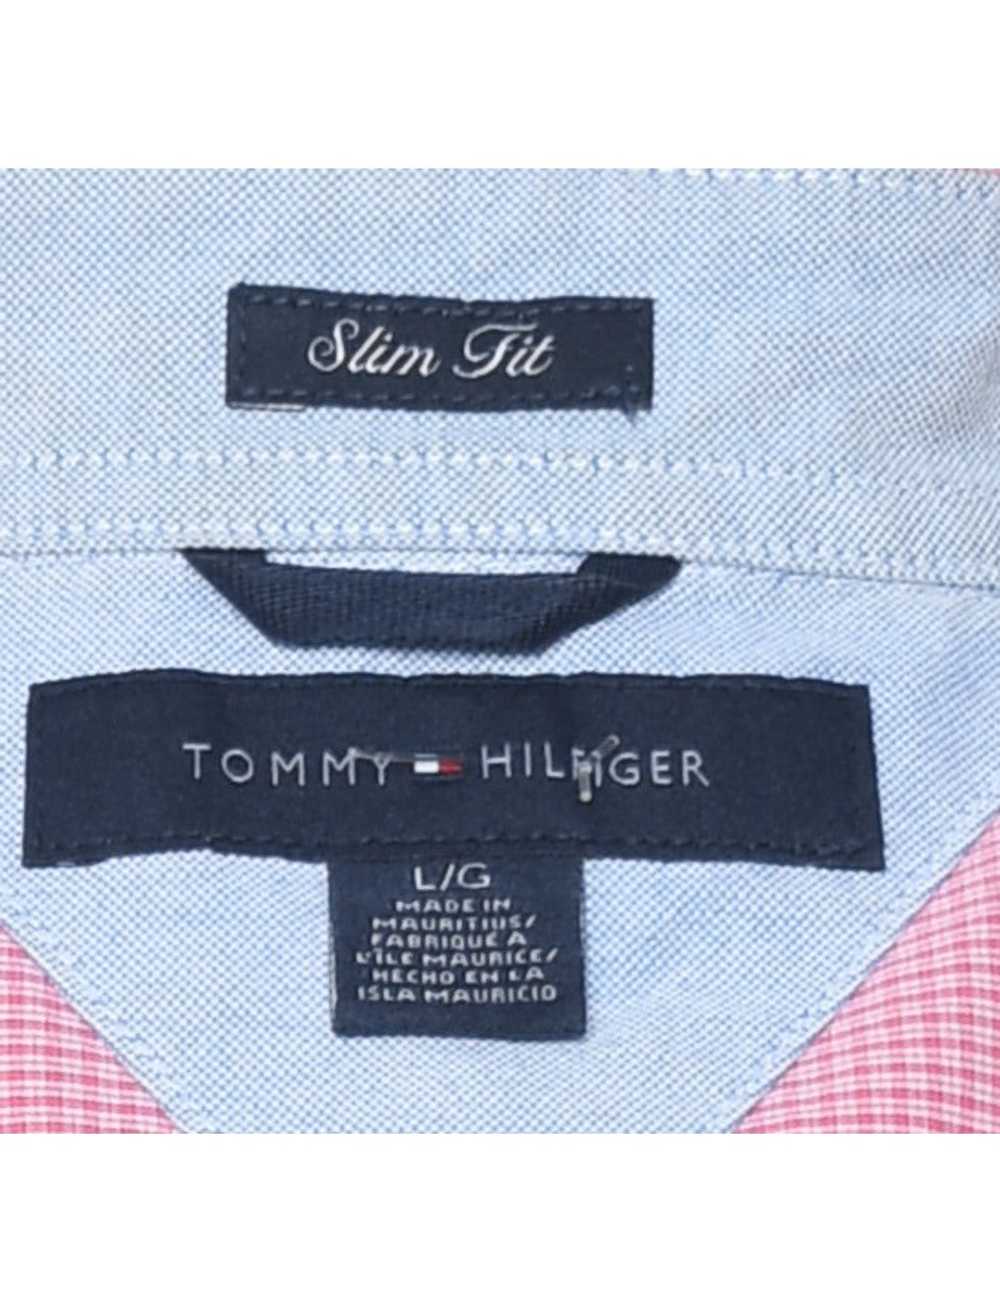 Tommy Hilfiger Checked Pale Pink & White Shirt - L - image 4